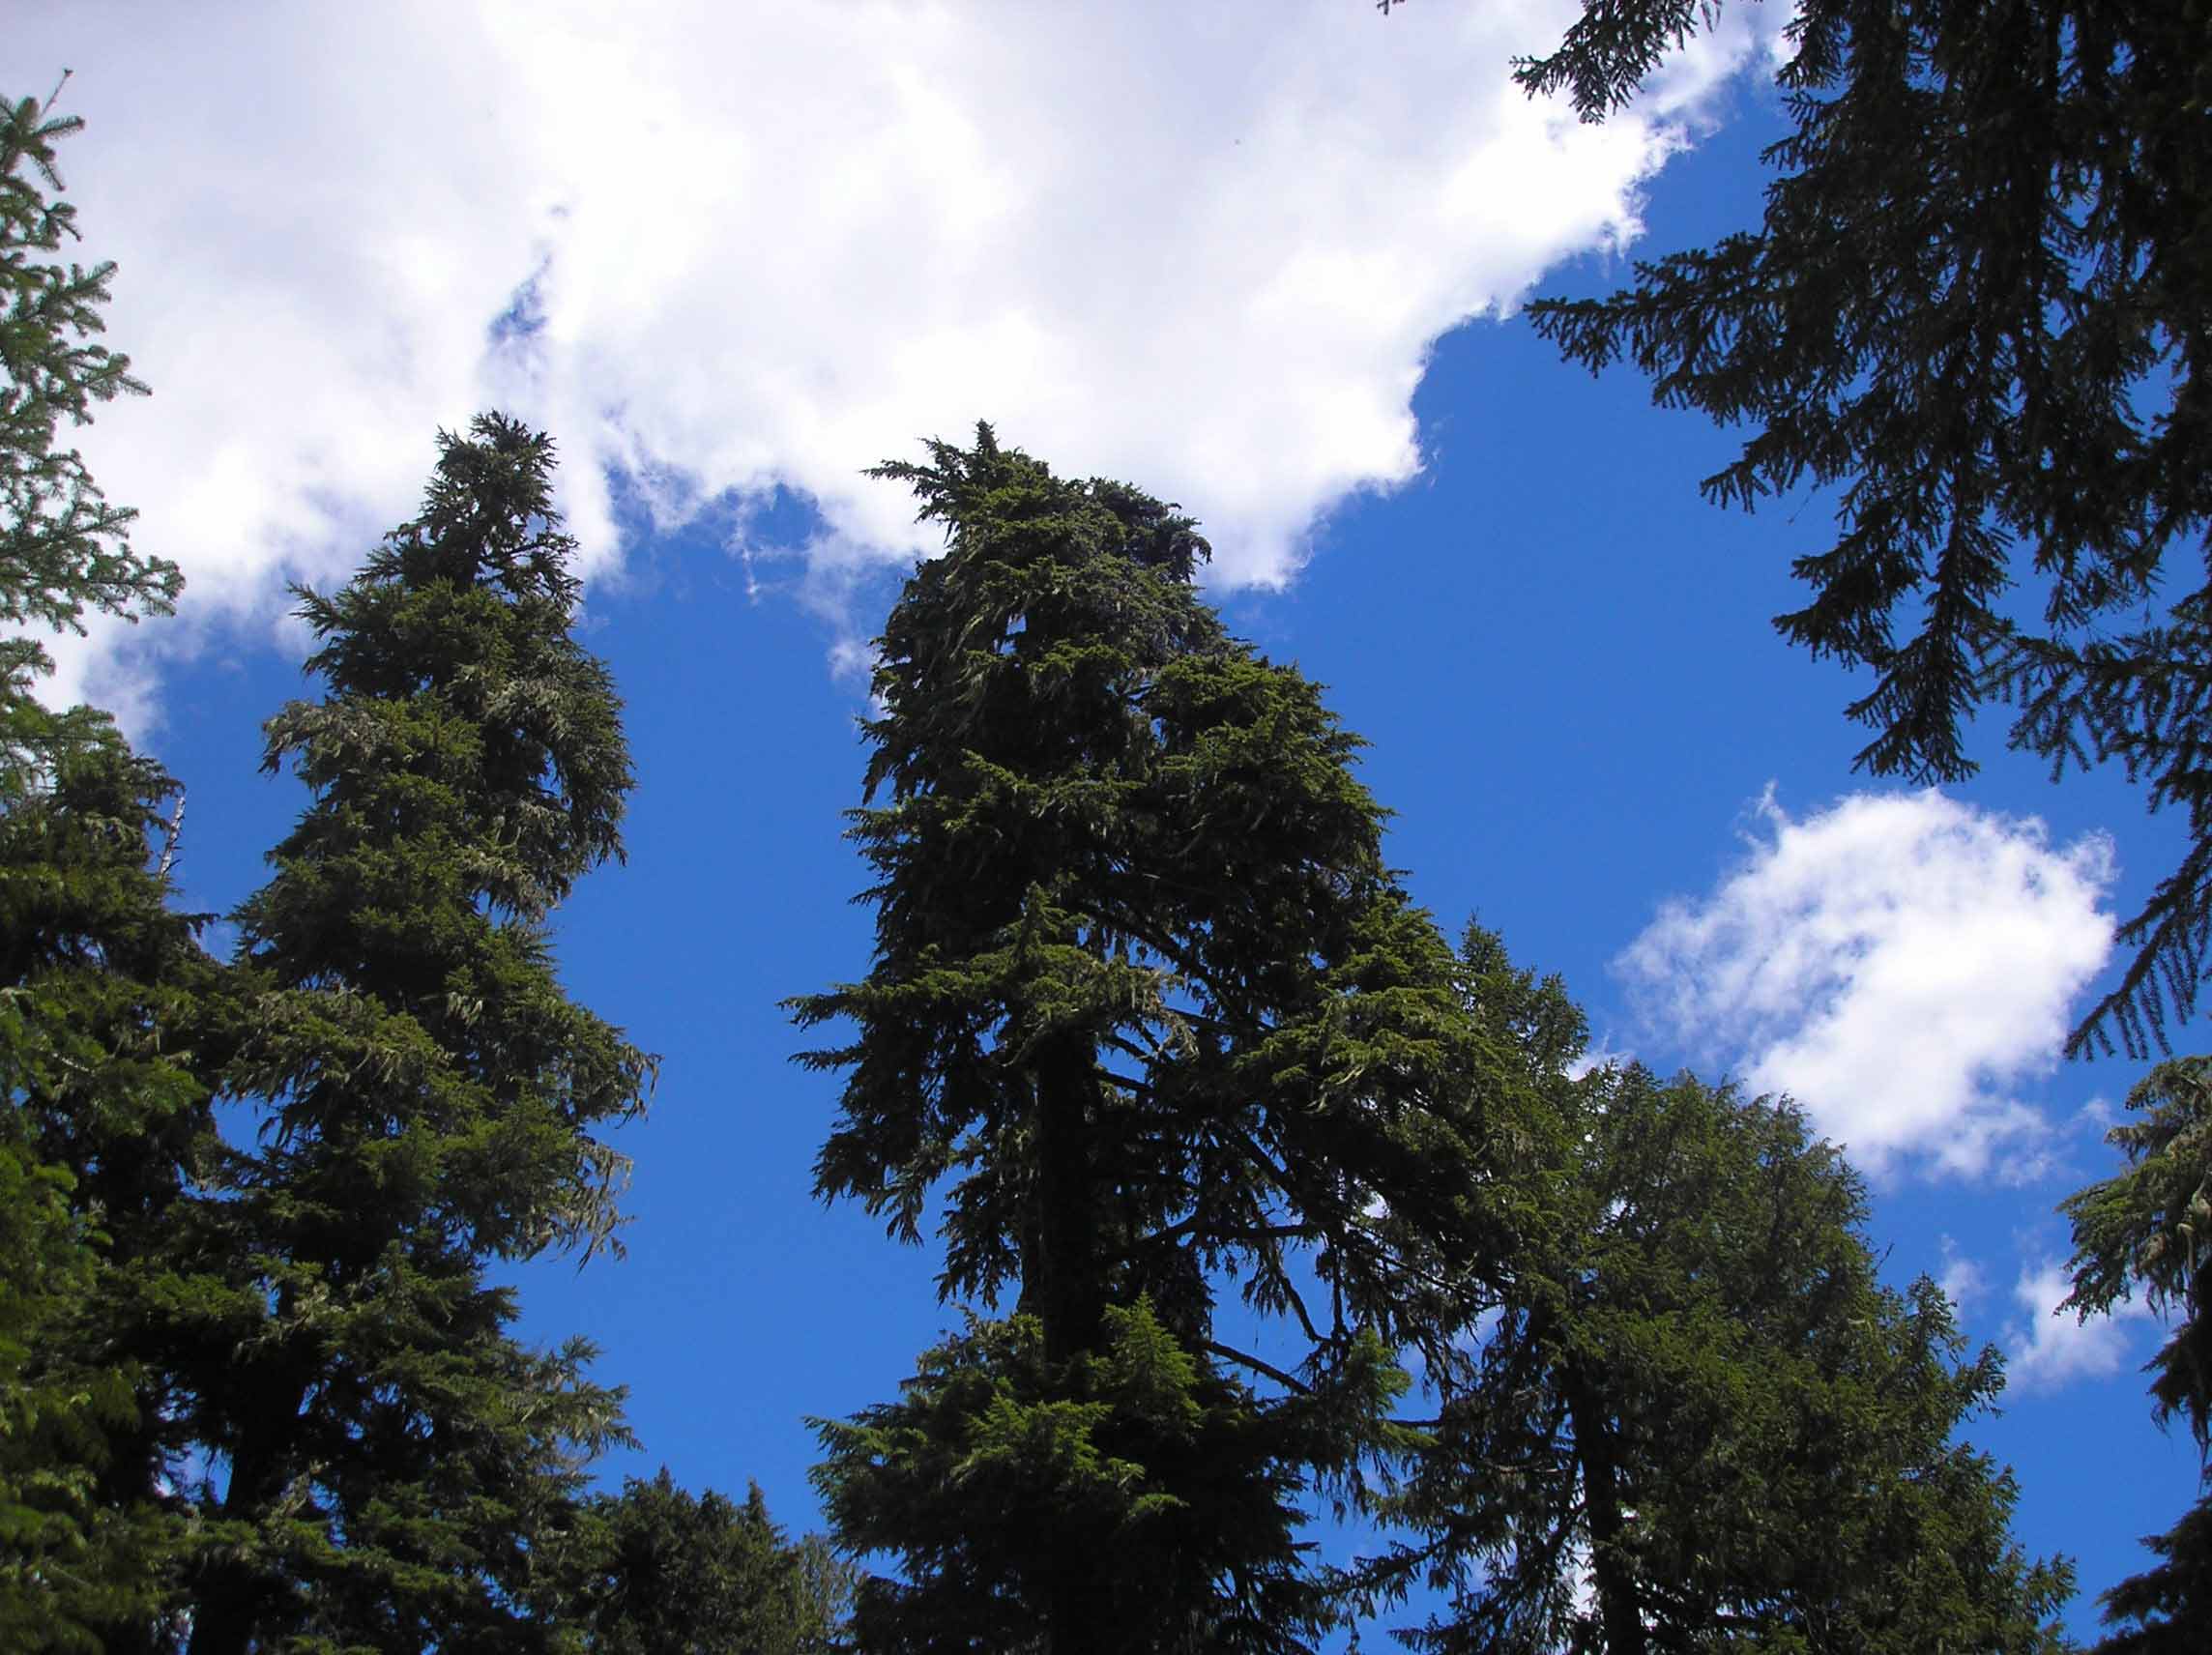 Even from the ground, looking straight up, our trees are magnificent.  Photo: Morf Morford